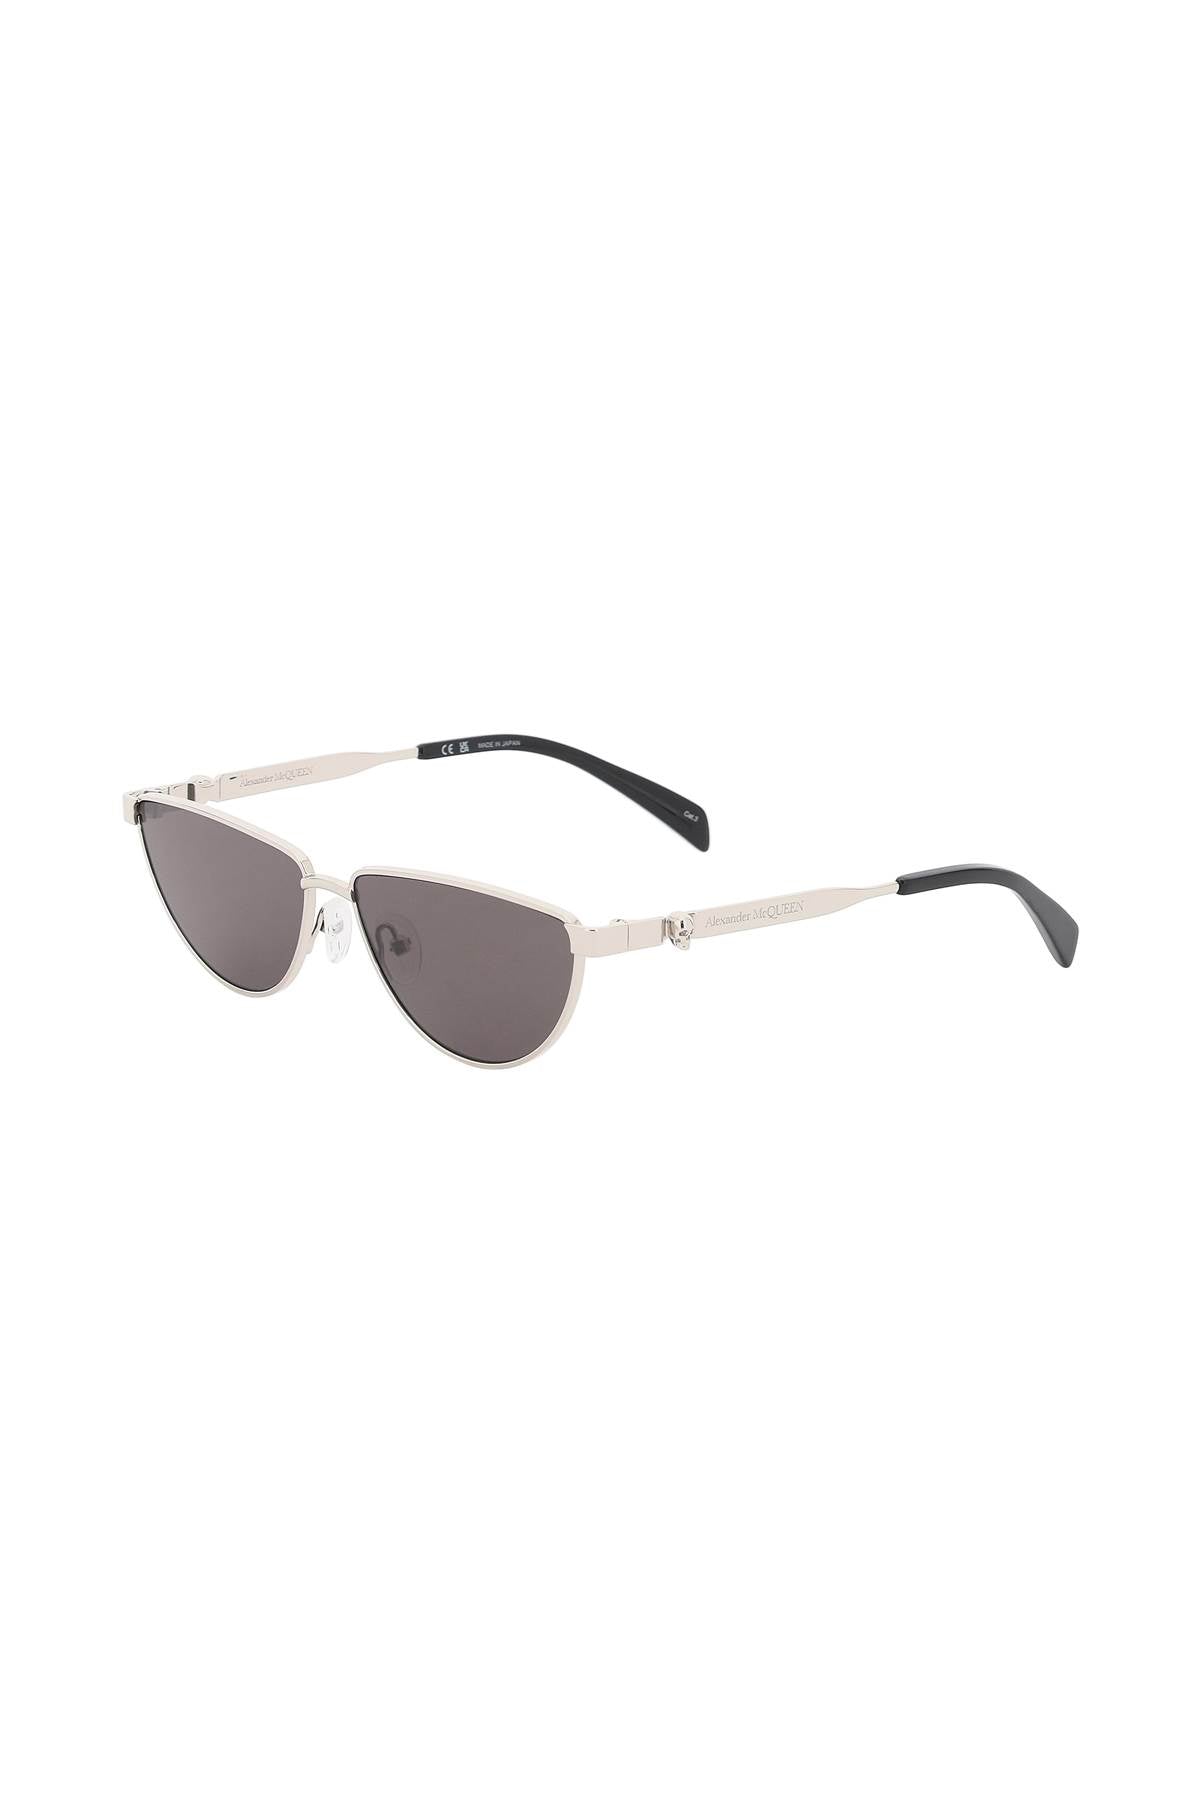 Alexander mcqueen "skull detail sunglasses with sun protection-1